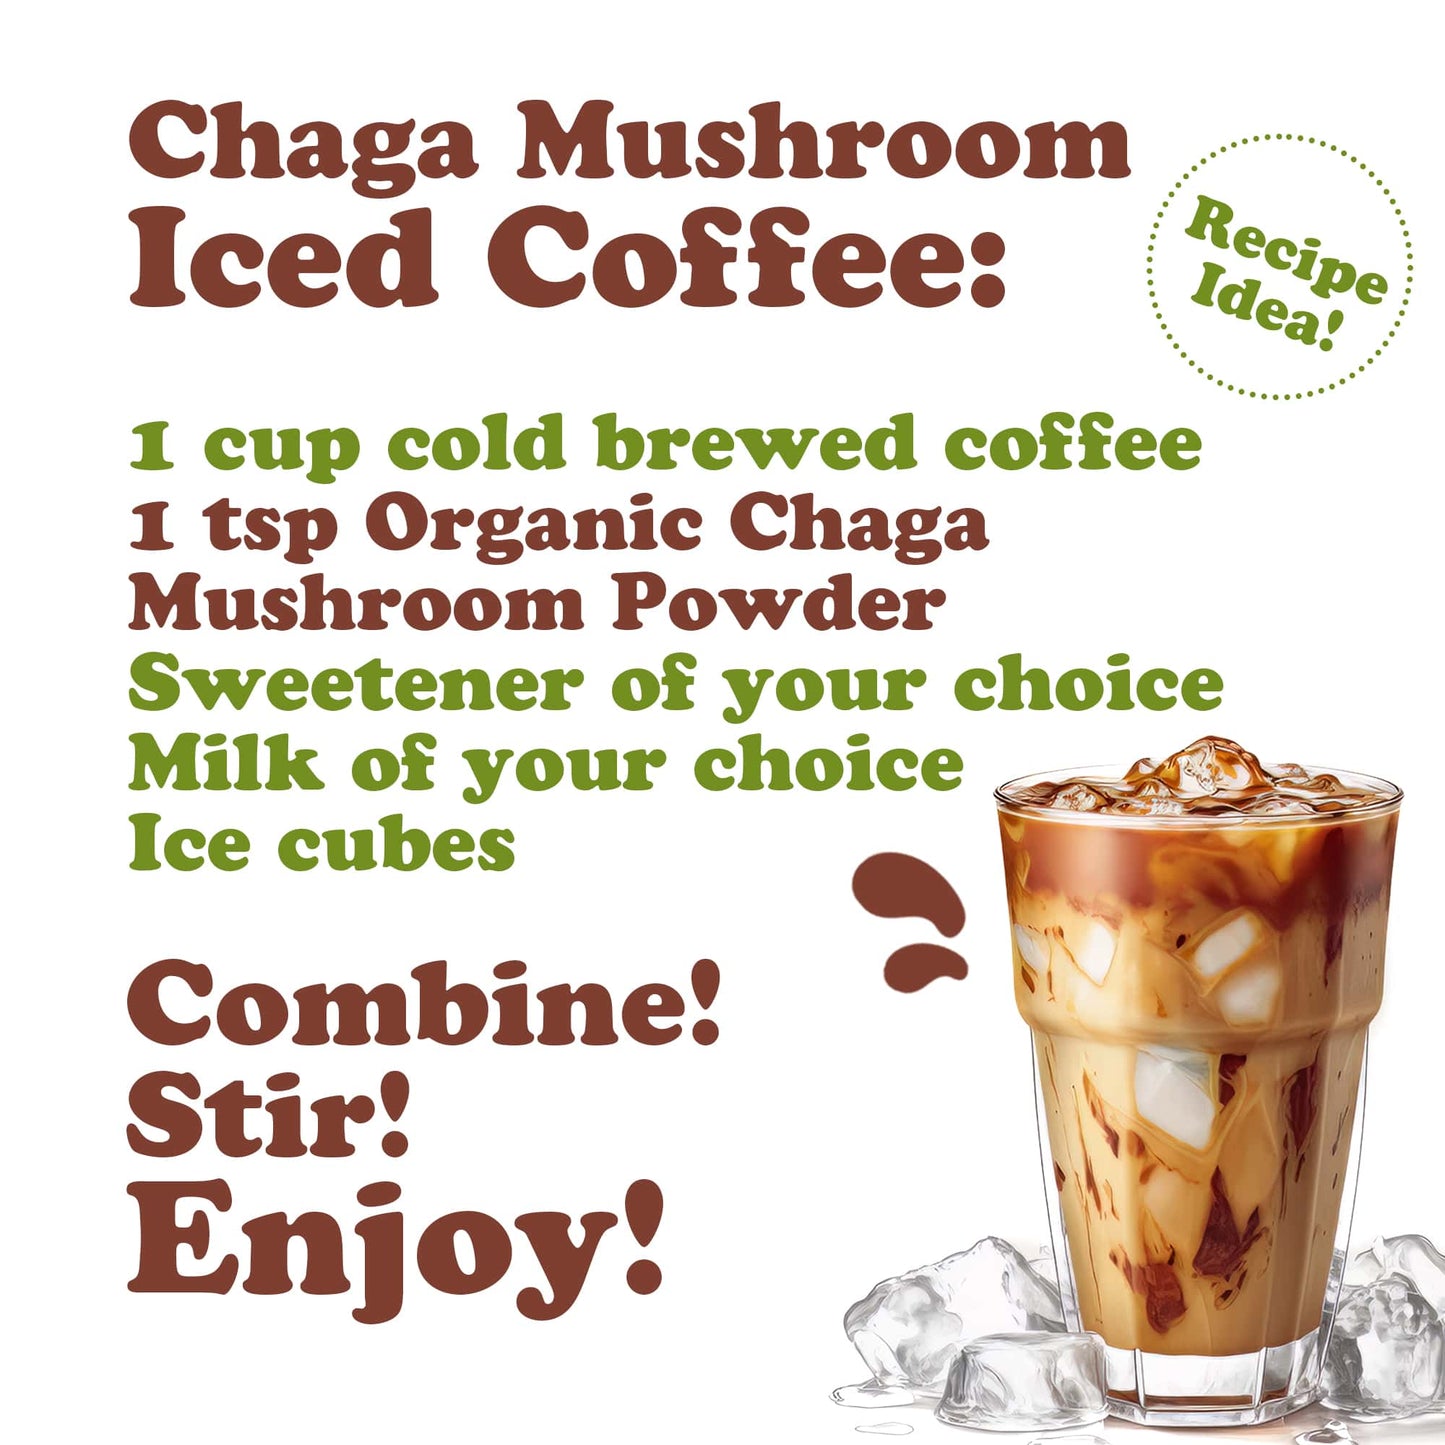 Organic Chaga Mushroom Powder – All Natural Vegan Superfood for Immunity and Holistic Wellness. Rich in Antioxidants and Nutrient-Packed. Non-GMO. 100% Pure. Great for Smoothies. Kosher